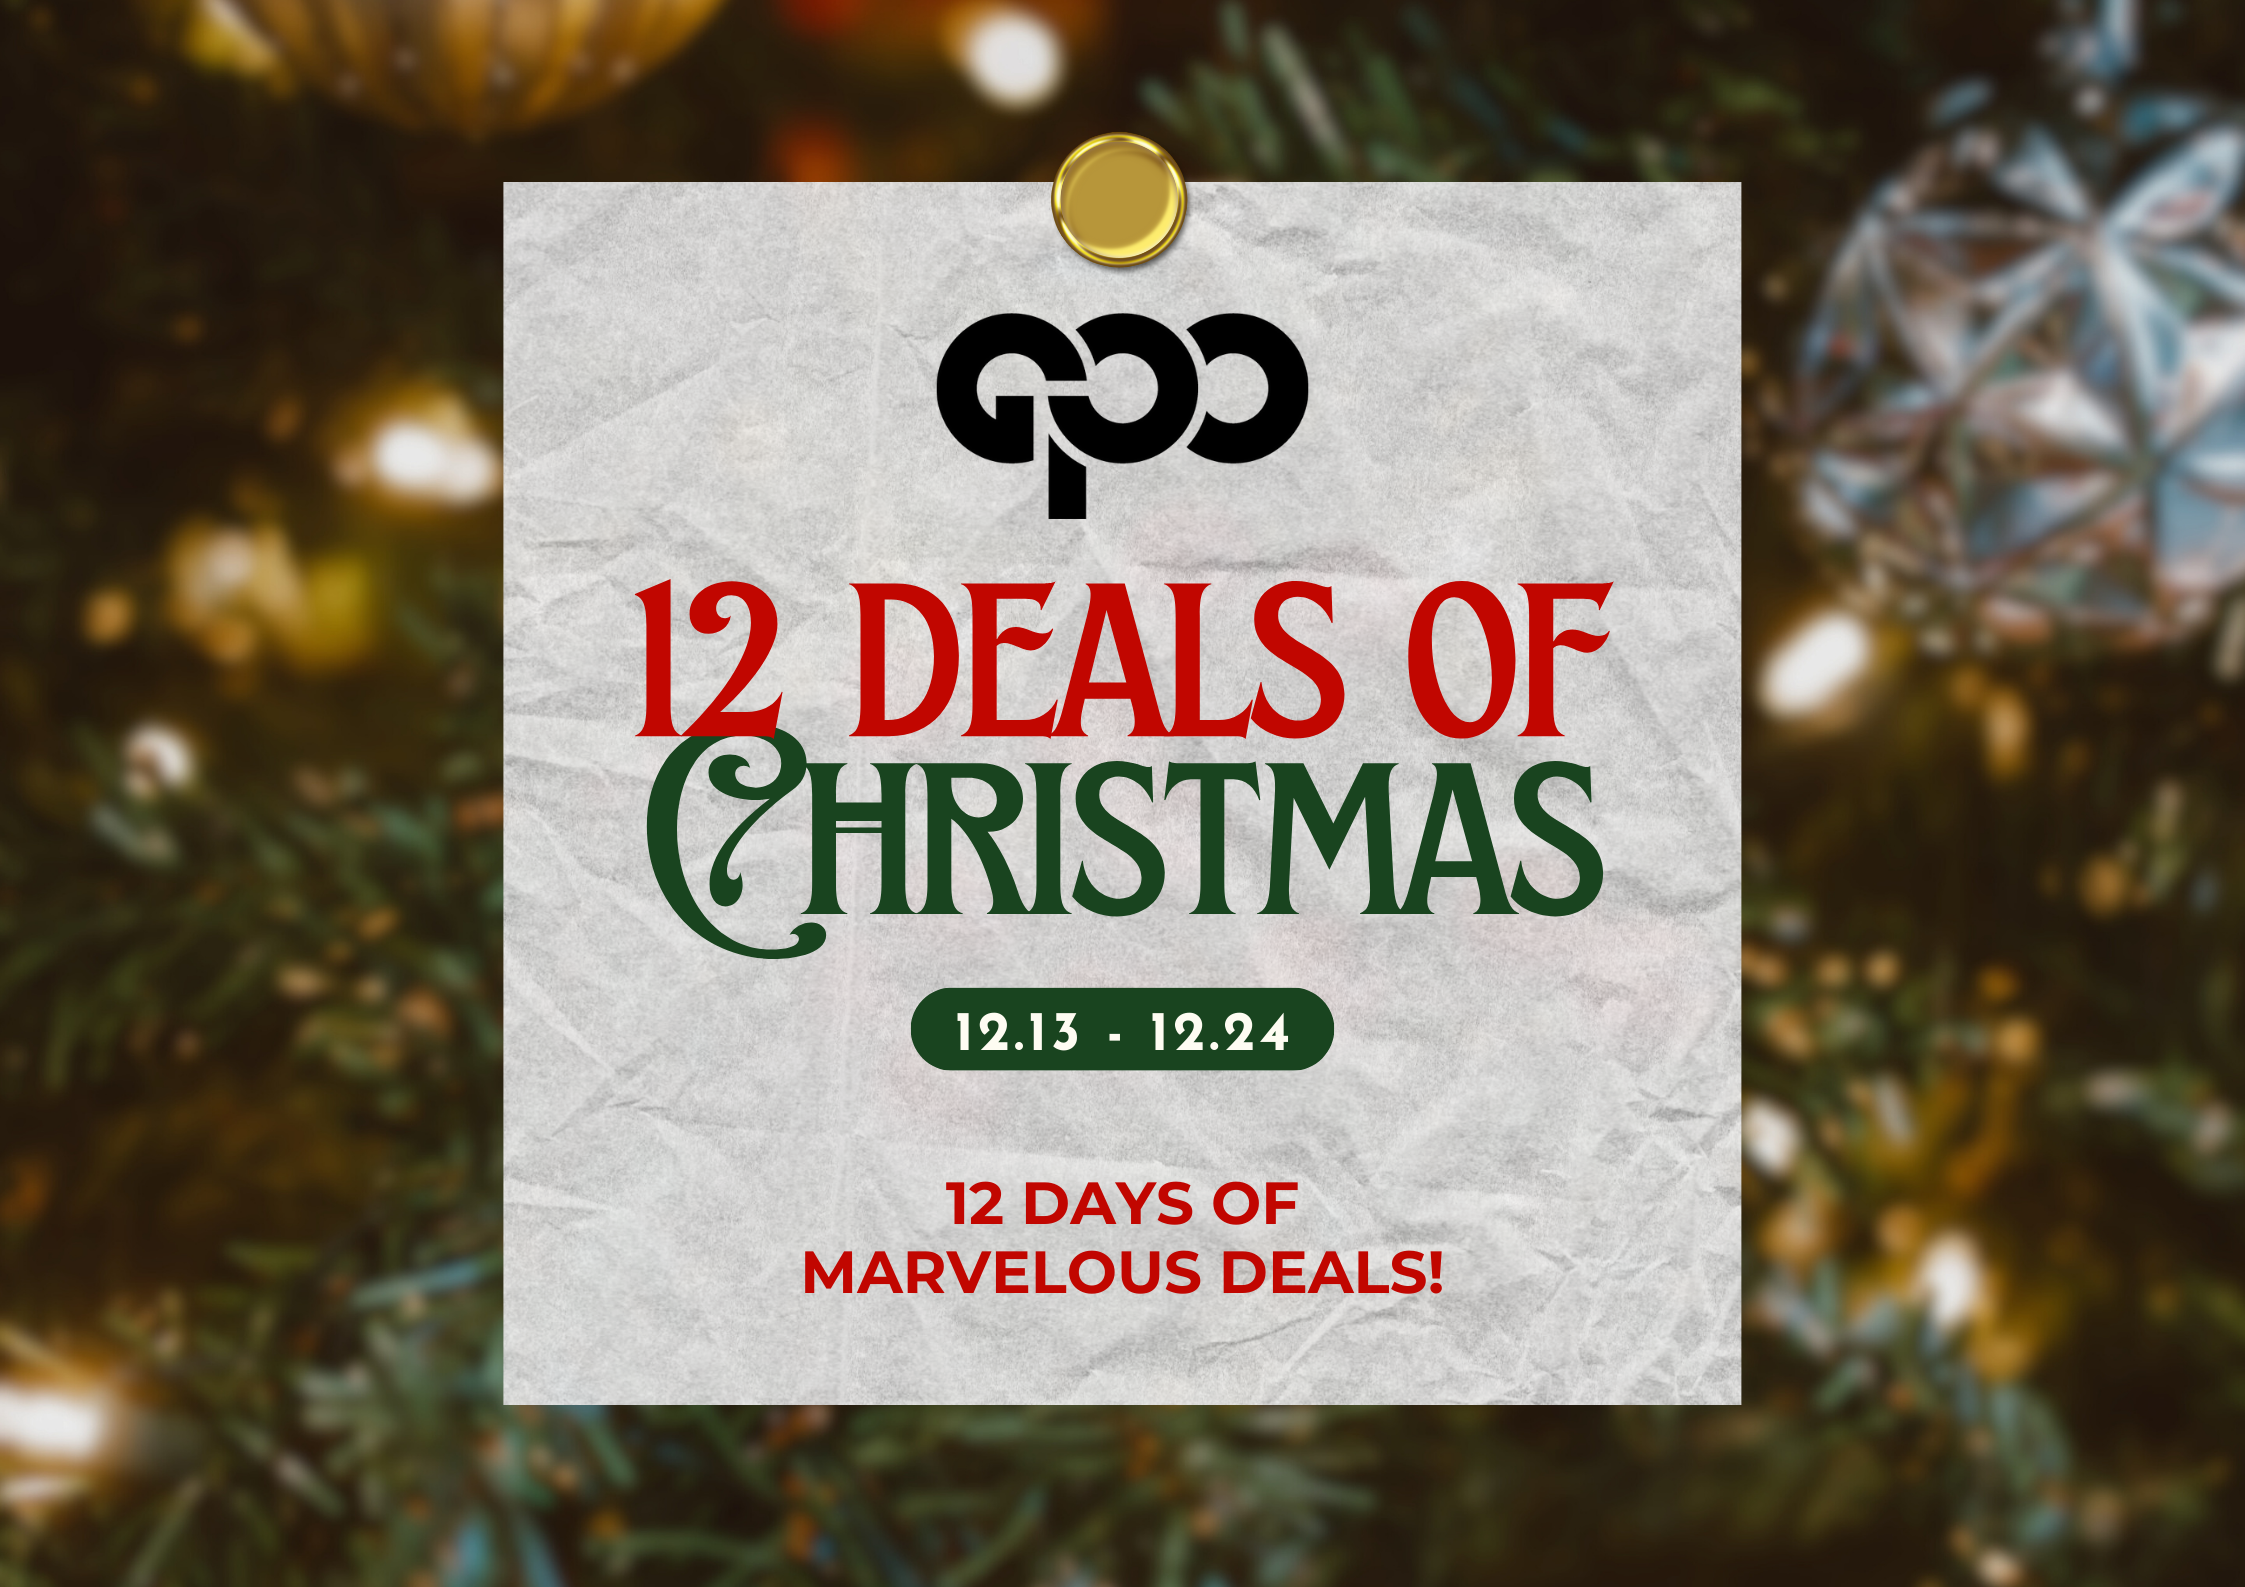 12 Deals of Christmas (December 20): The Dollhouse Collection